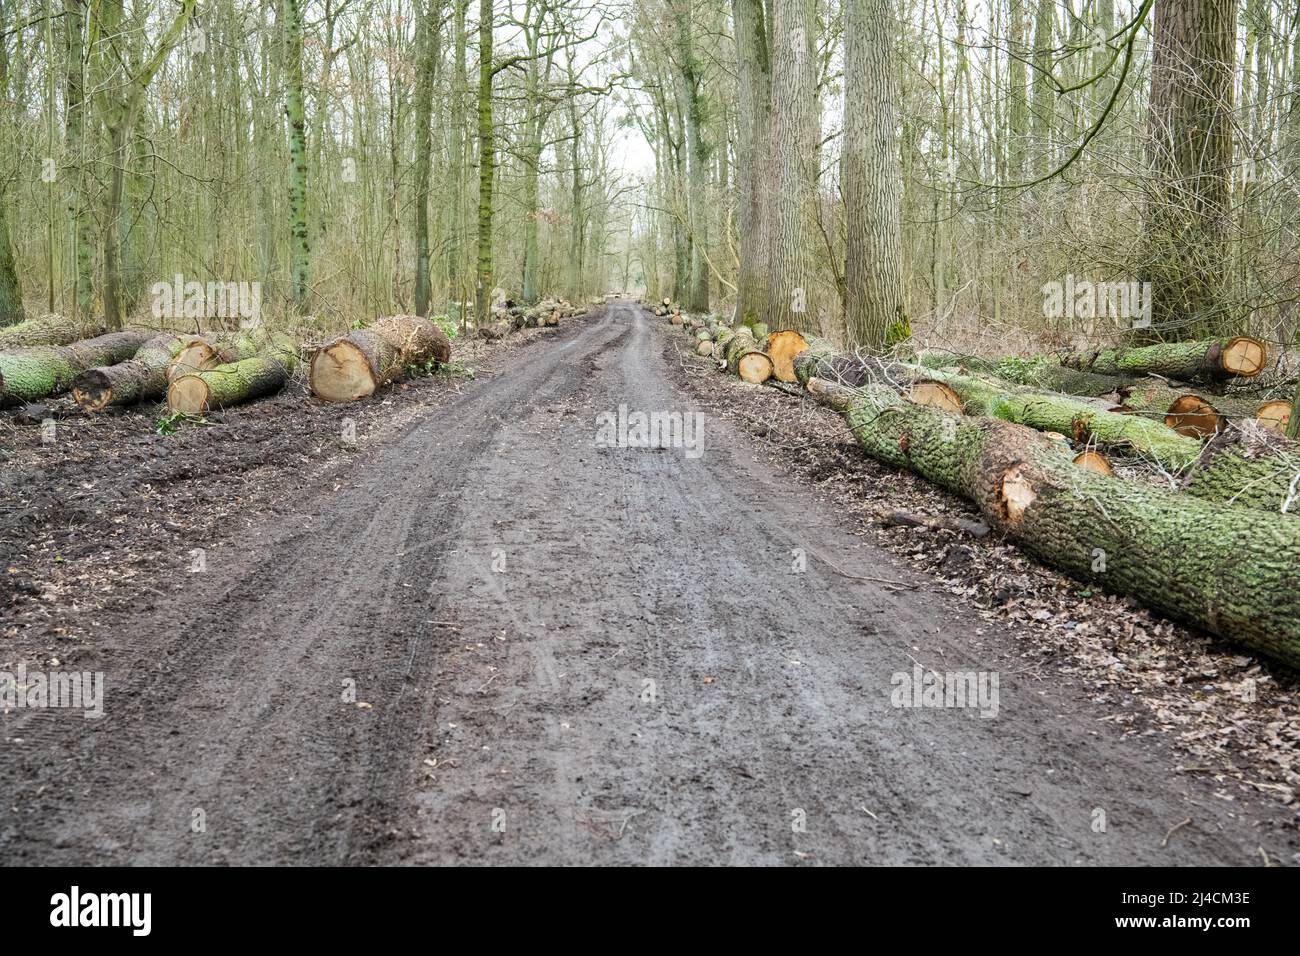 Forestry in the forest, wide forest road with tracks from a harvester, felled trees lying ready for removal on the right and left, Duesseldorf Stock Photo